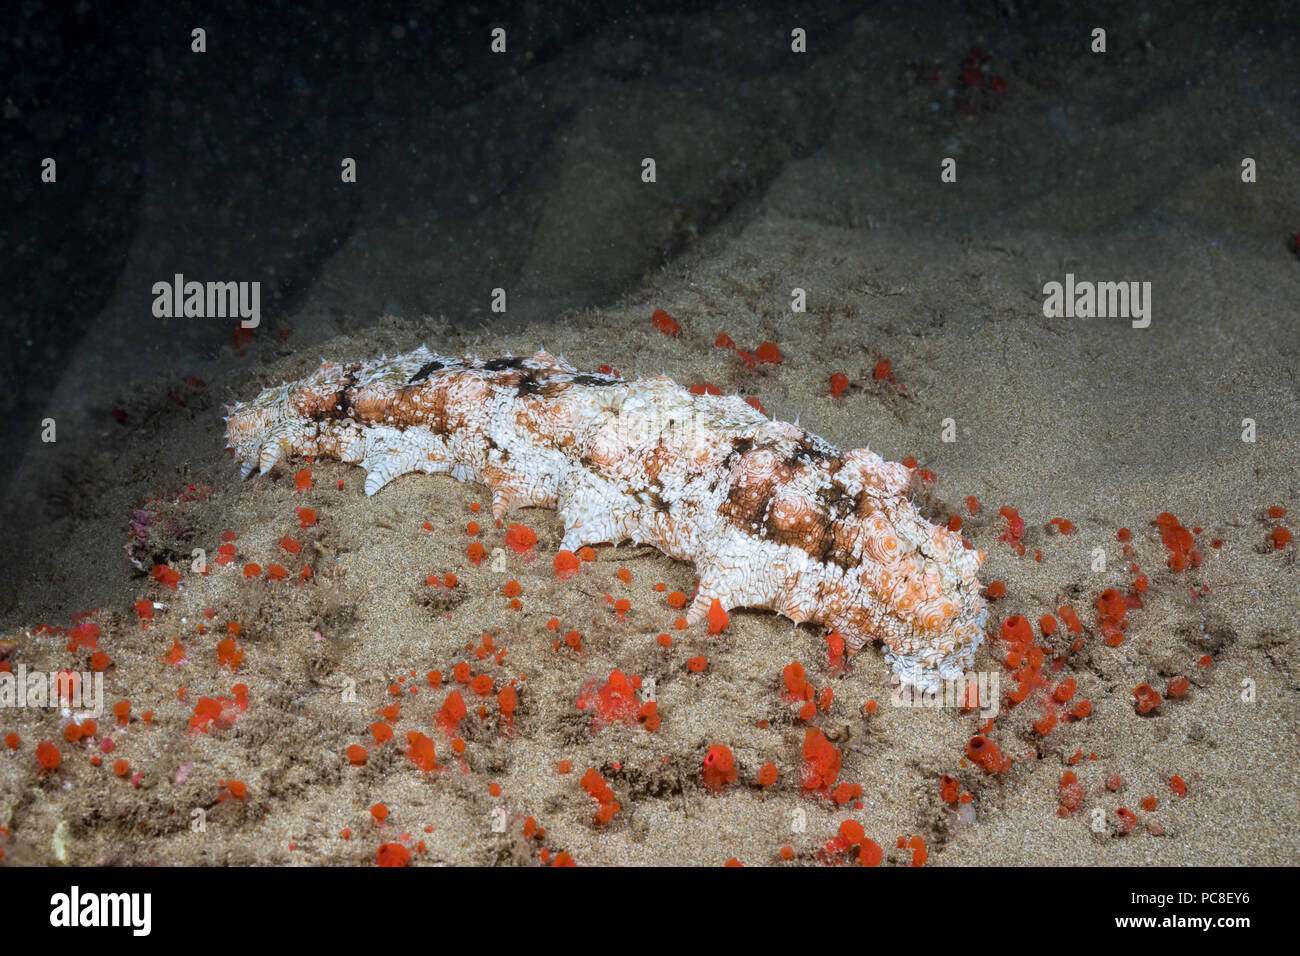 This sea cucumber, Holothuria pervicax, was photographed at night. It is rare to see during the day. Red boring sponge, Hamigera sp, is covering the f Stock Photo